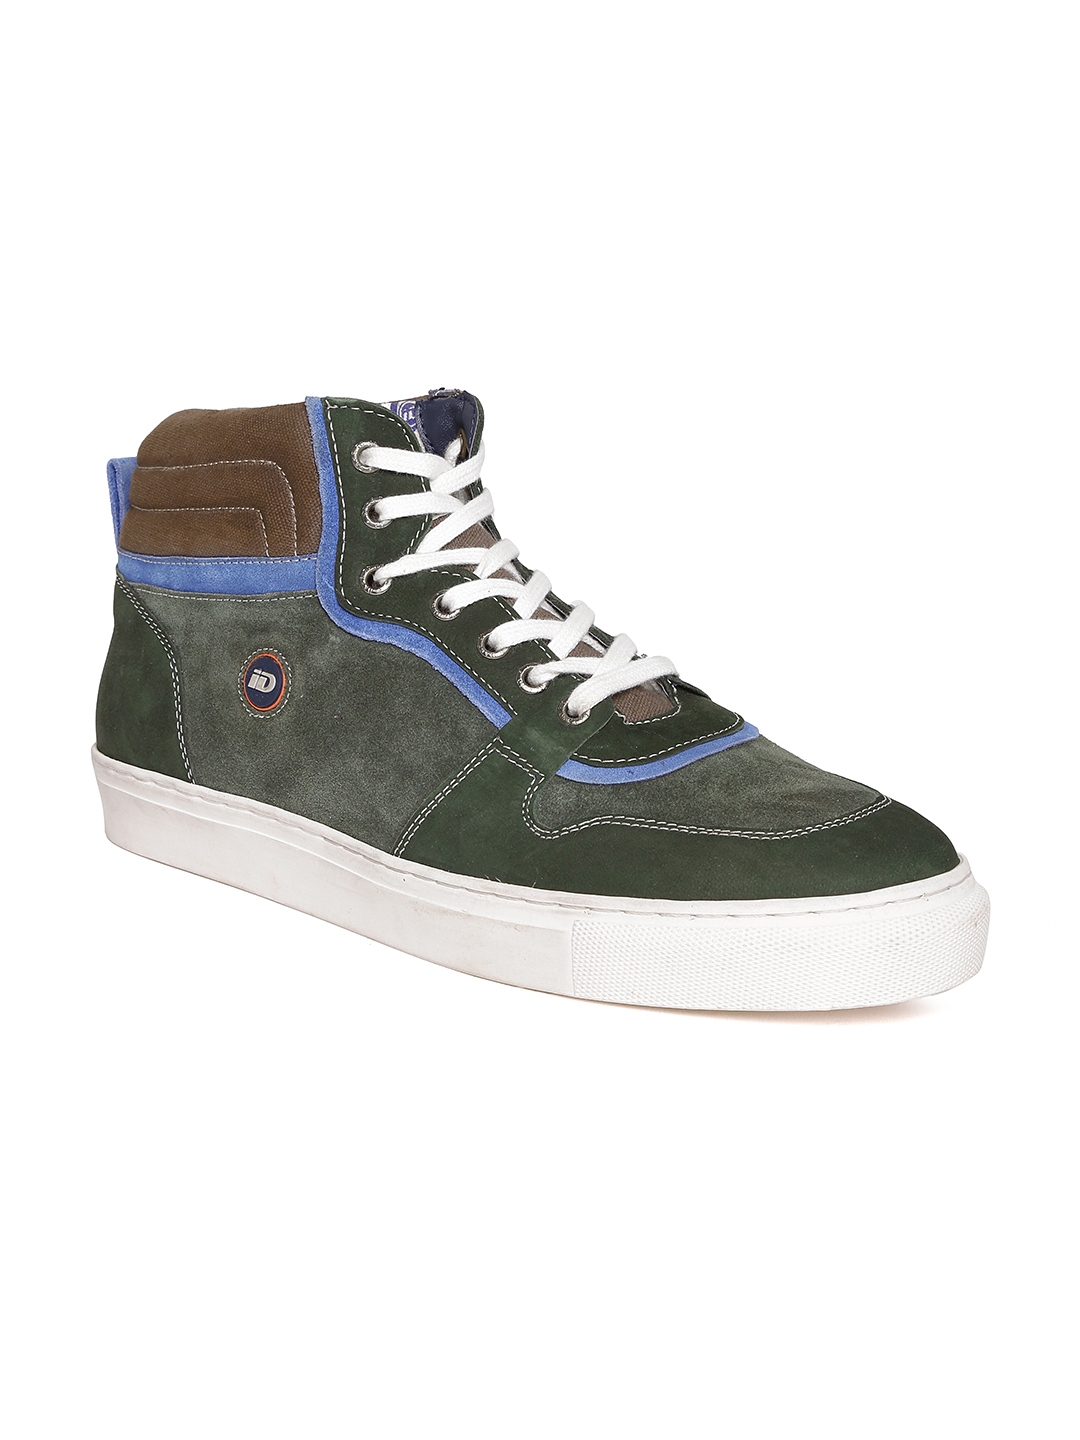 11465287679748 ID Men Olive Green Genuine Leather Sneakers 6141465287679483 1 